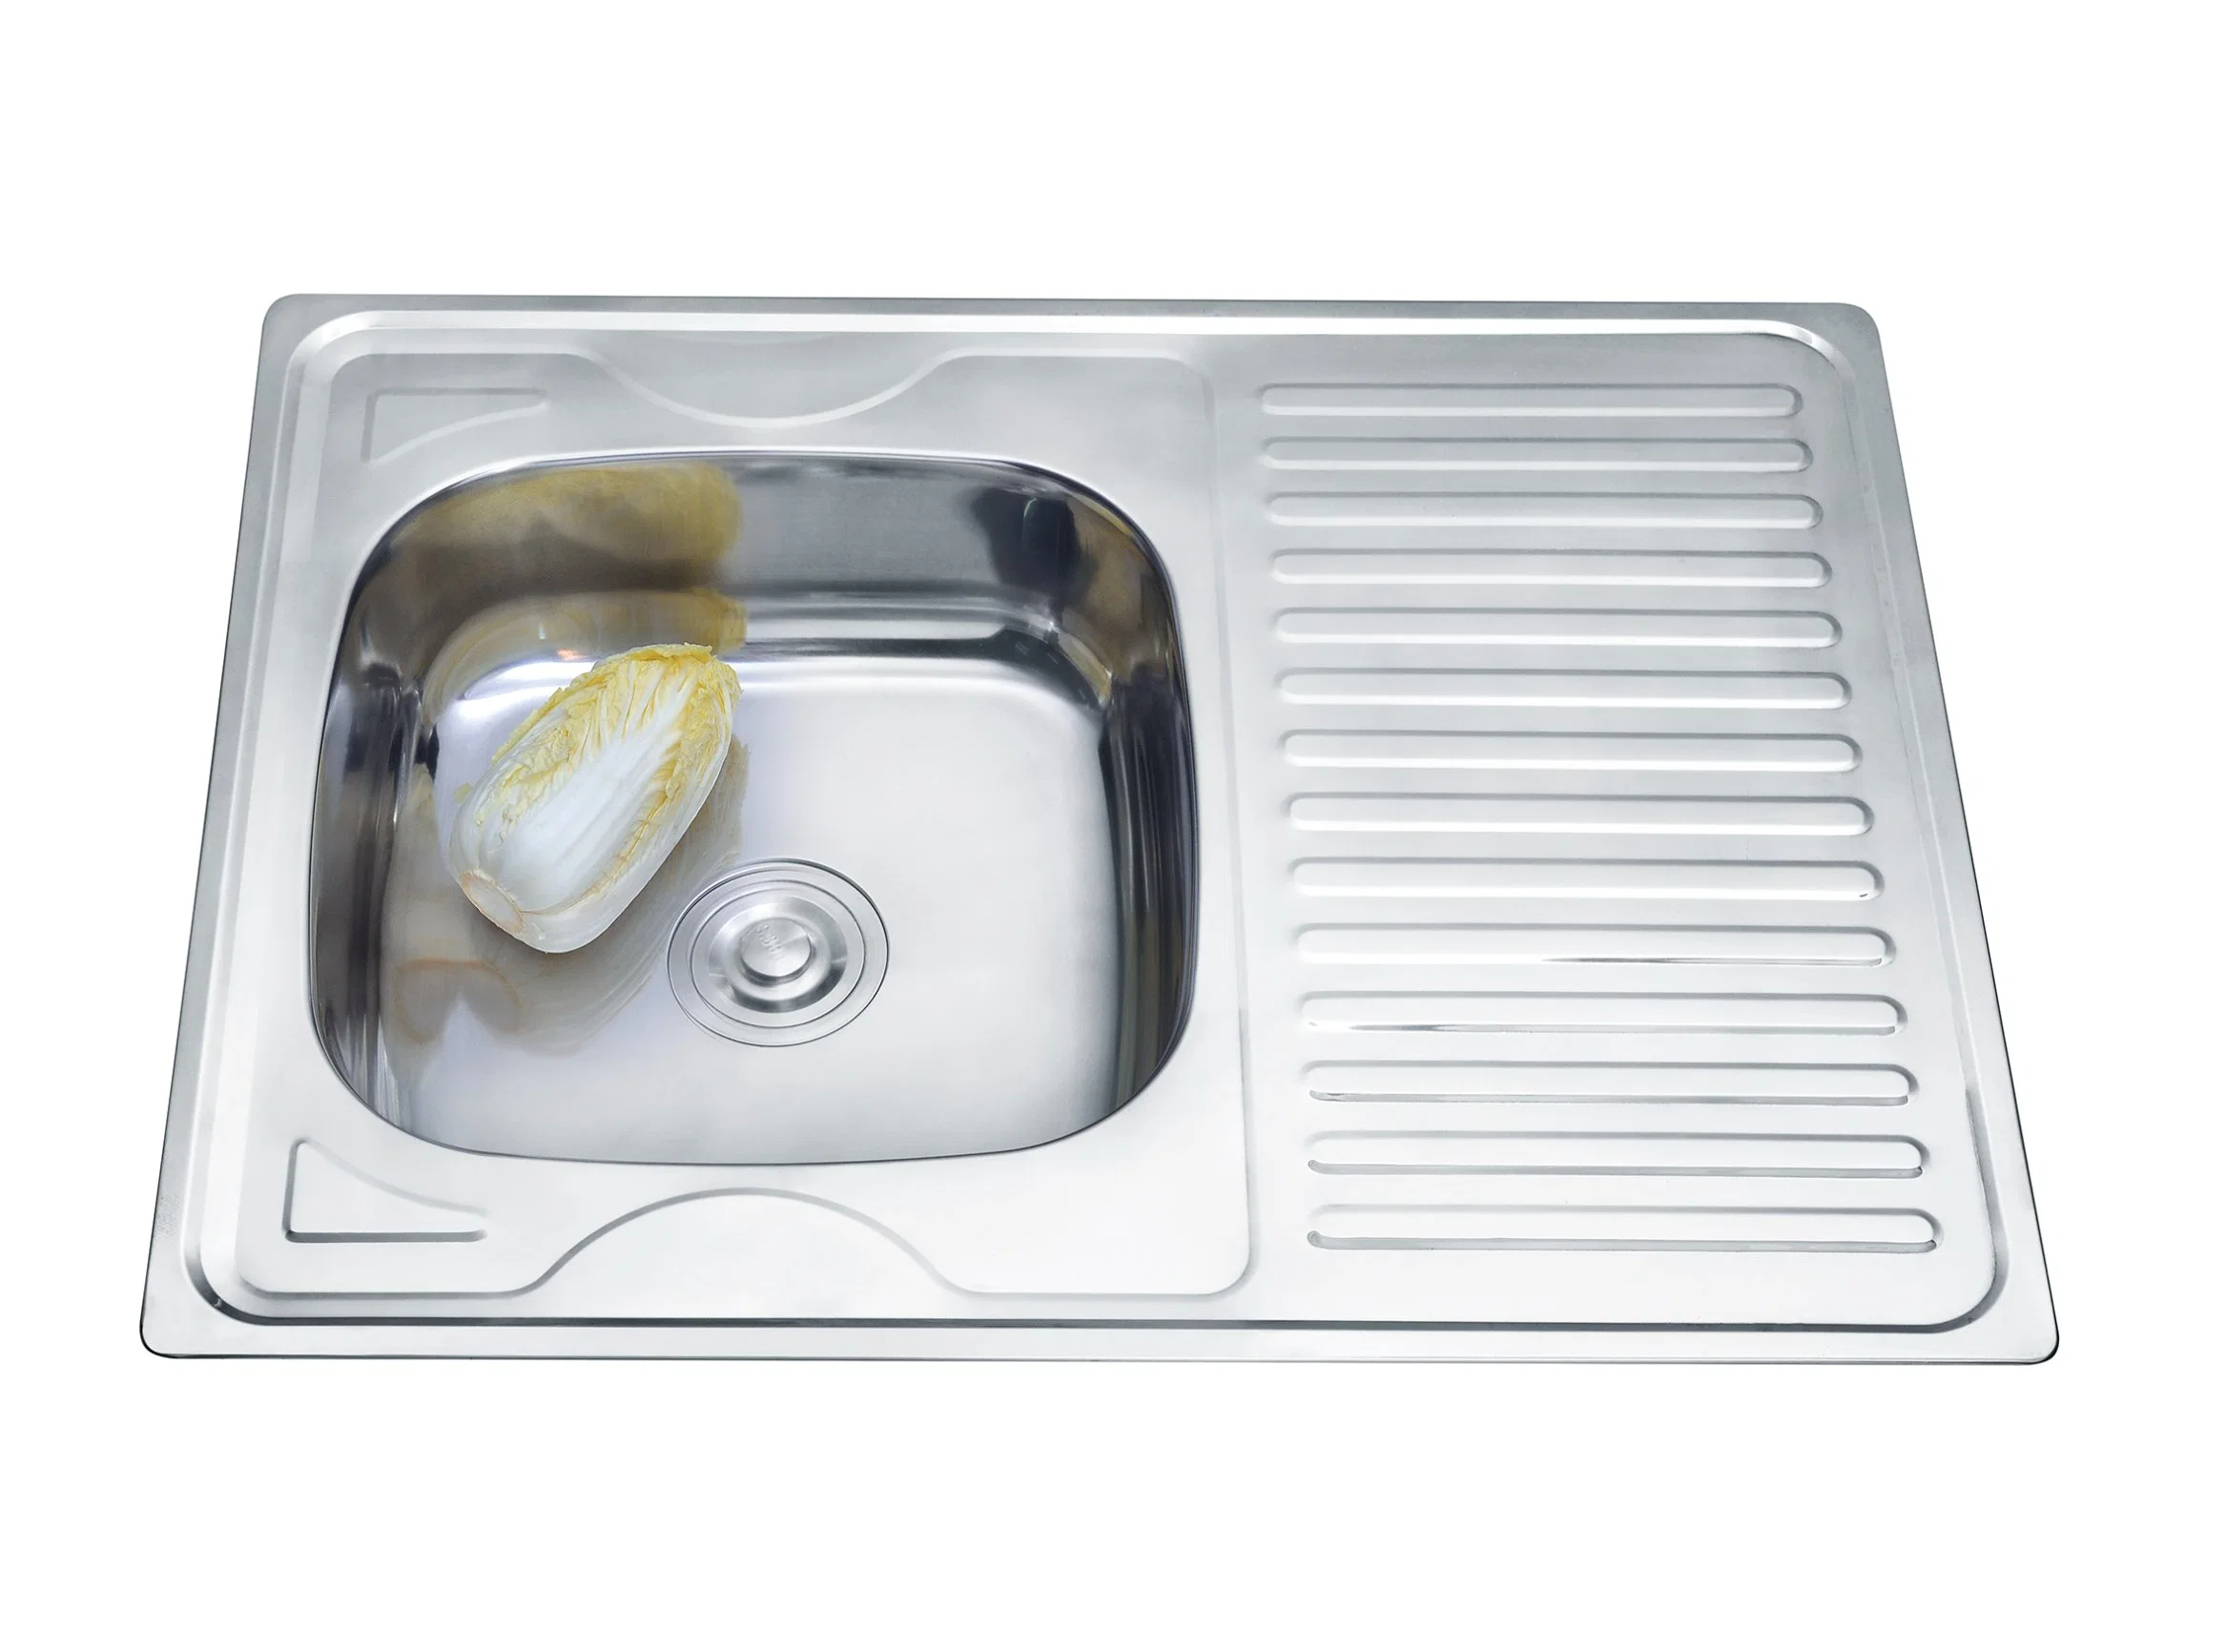 Wholesale 201/304 Stainless Steel Single Bowl Kitchen Sink Modern Sink Bowl with Drainboard